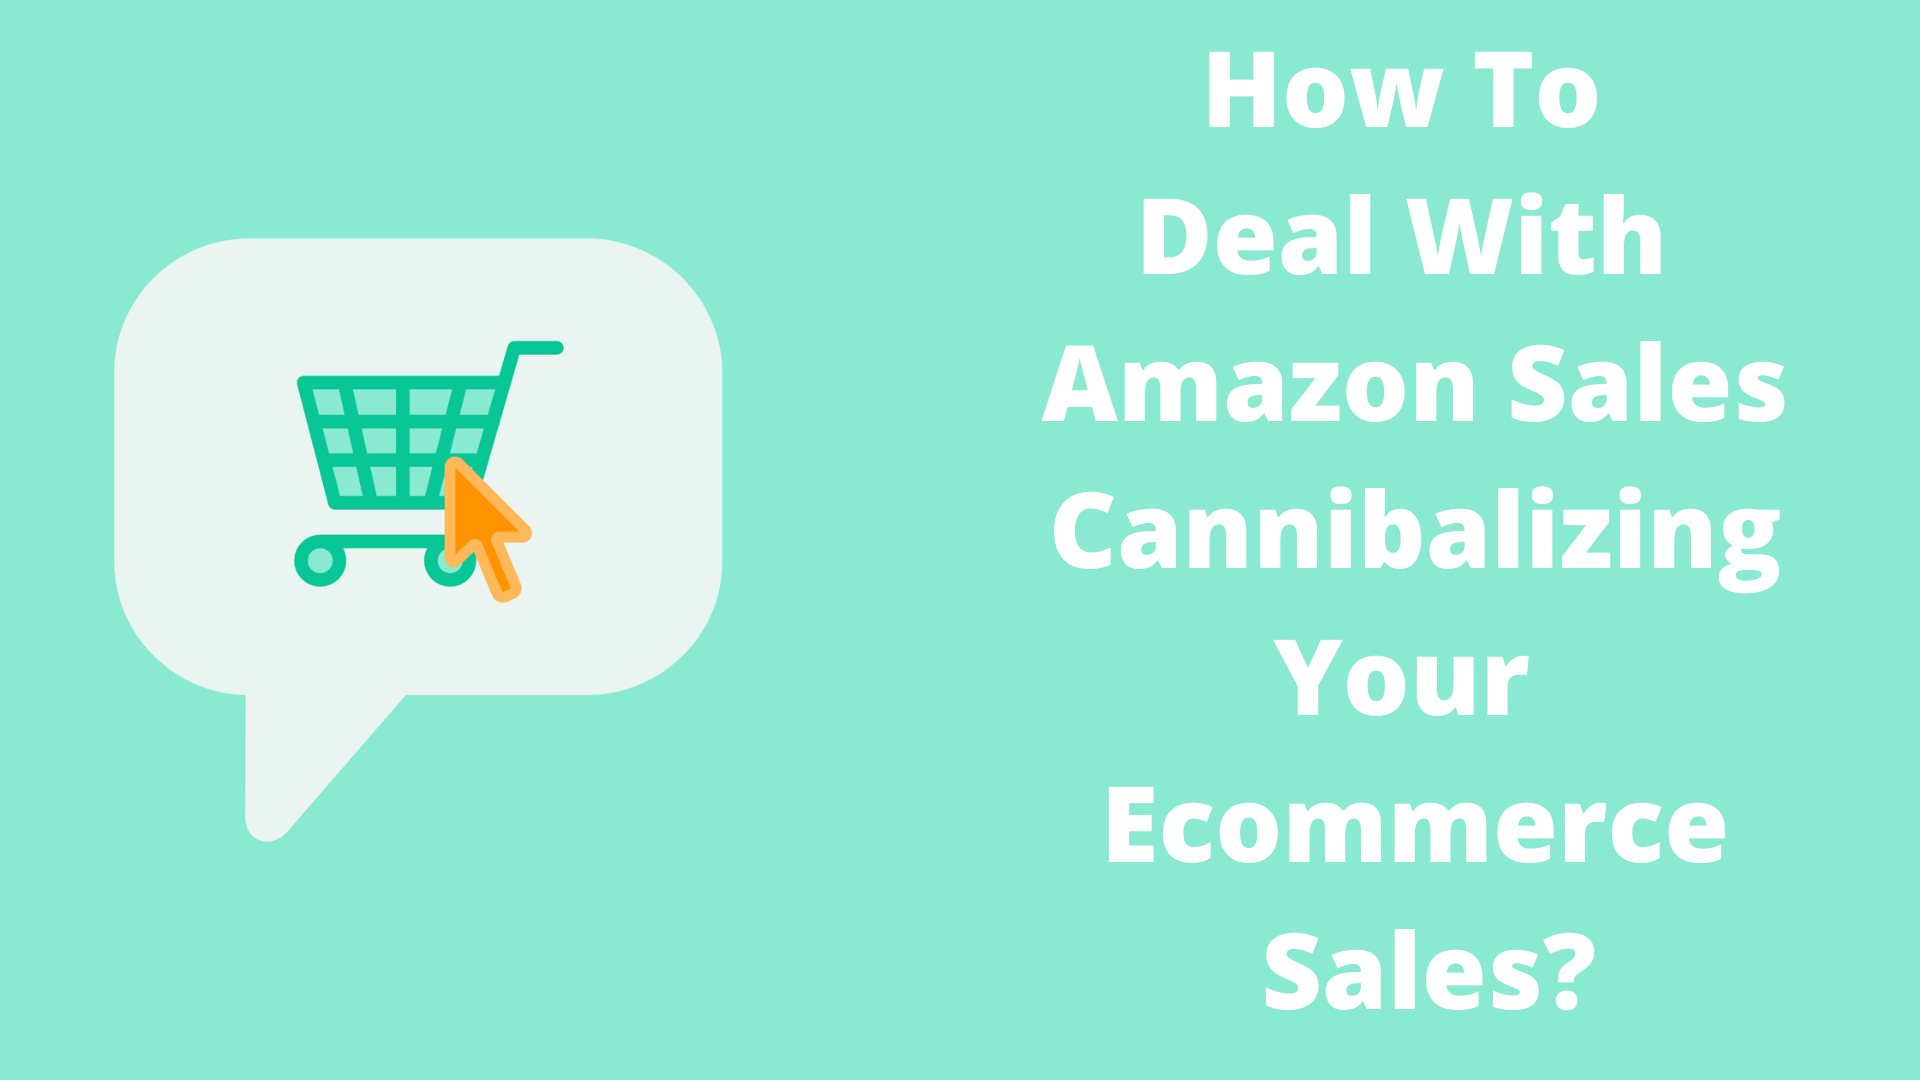 How to Deal With Amazon Sales Cannibalizing Your Ecommerce Sales